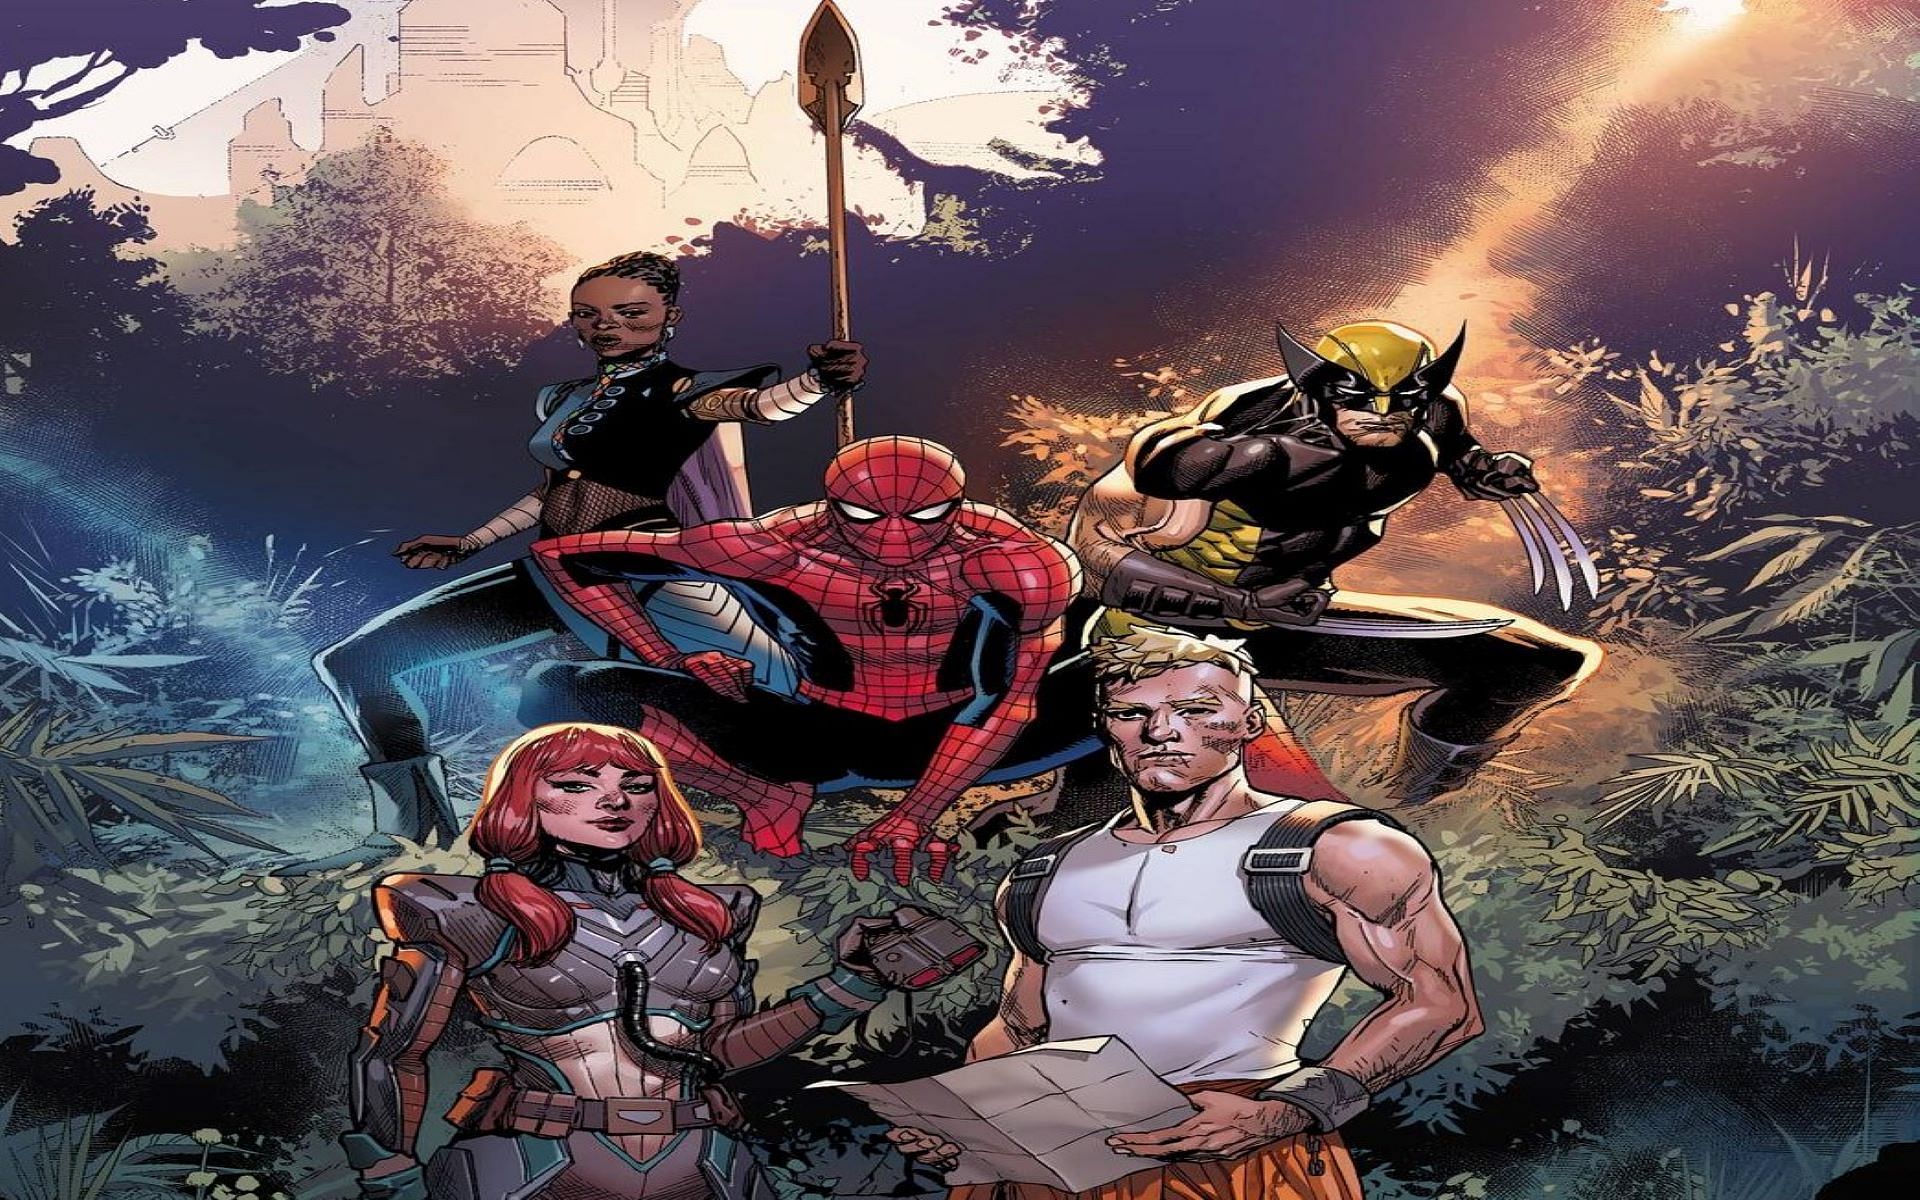 Marvel Zero War comic series will bring several exclusive skins to the game (Image via Marvel)